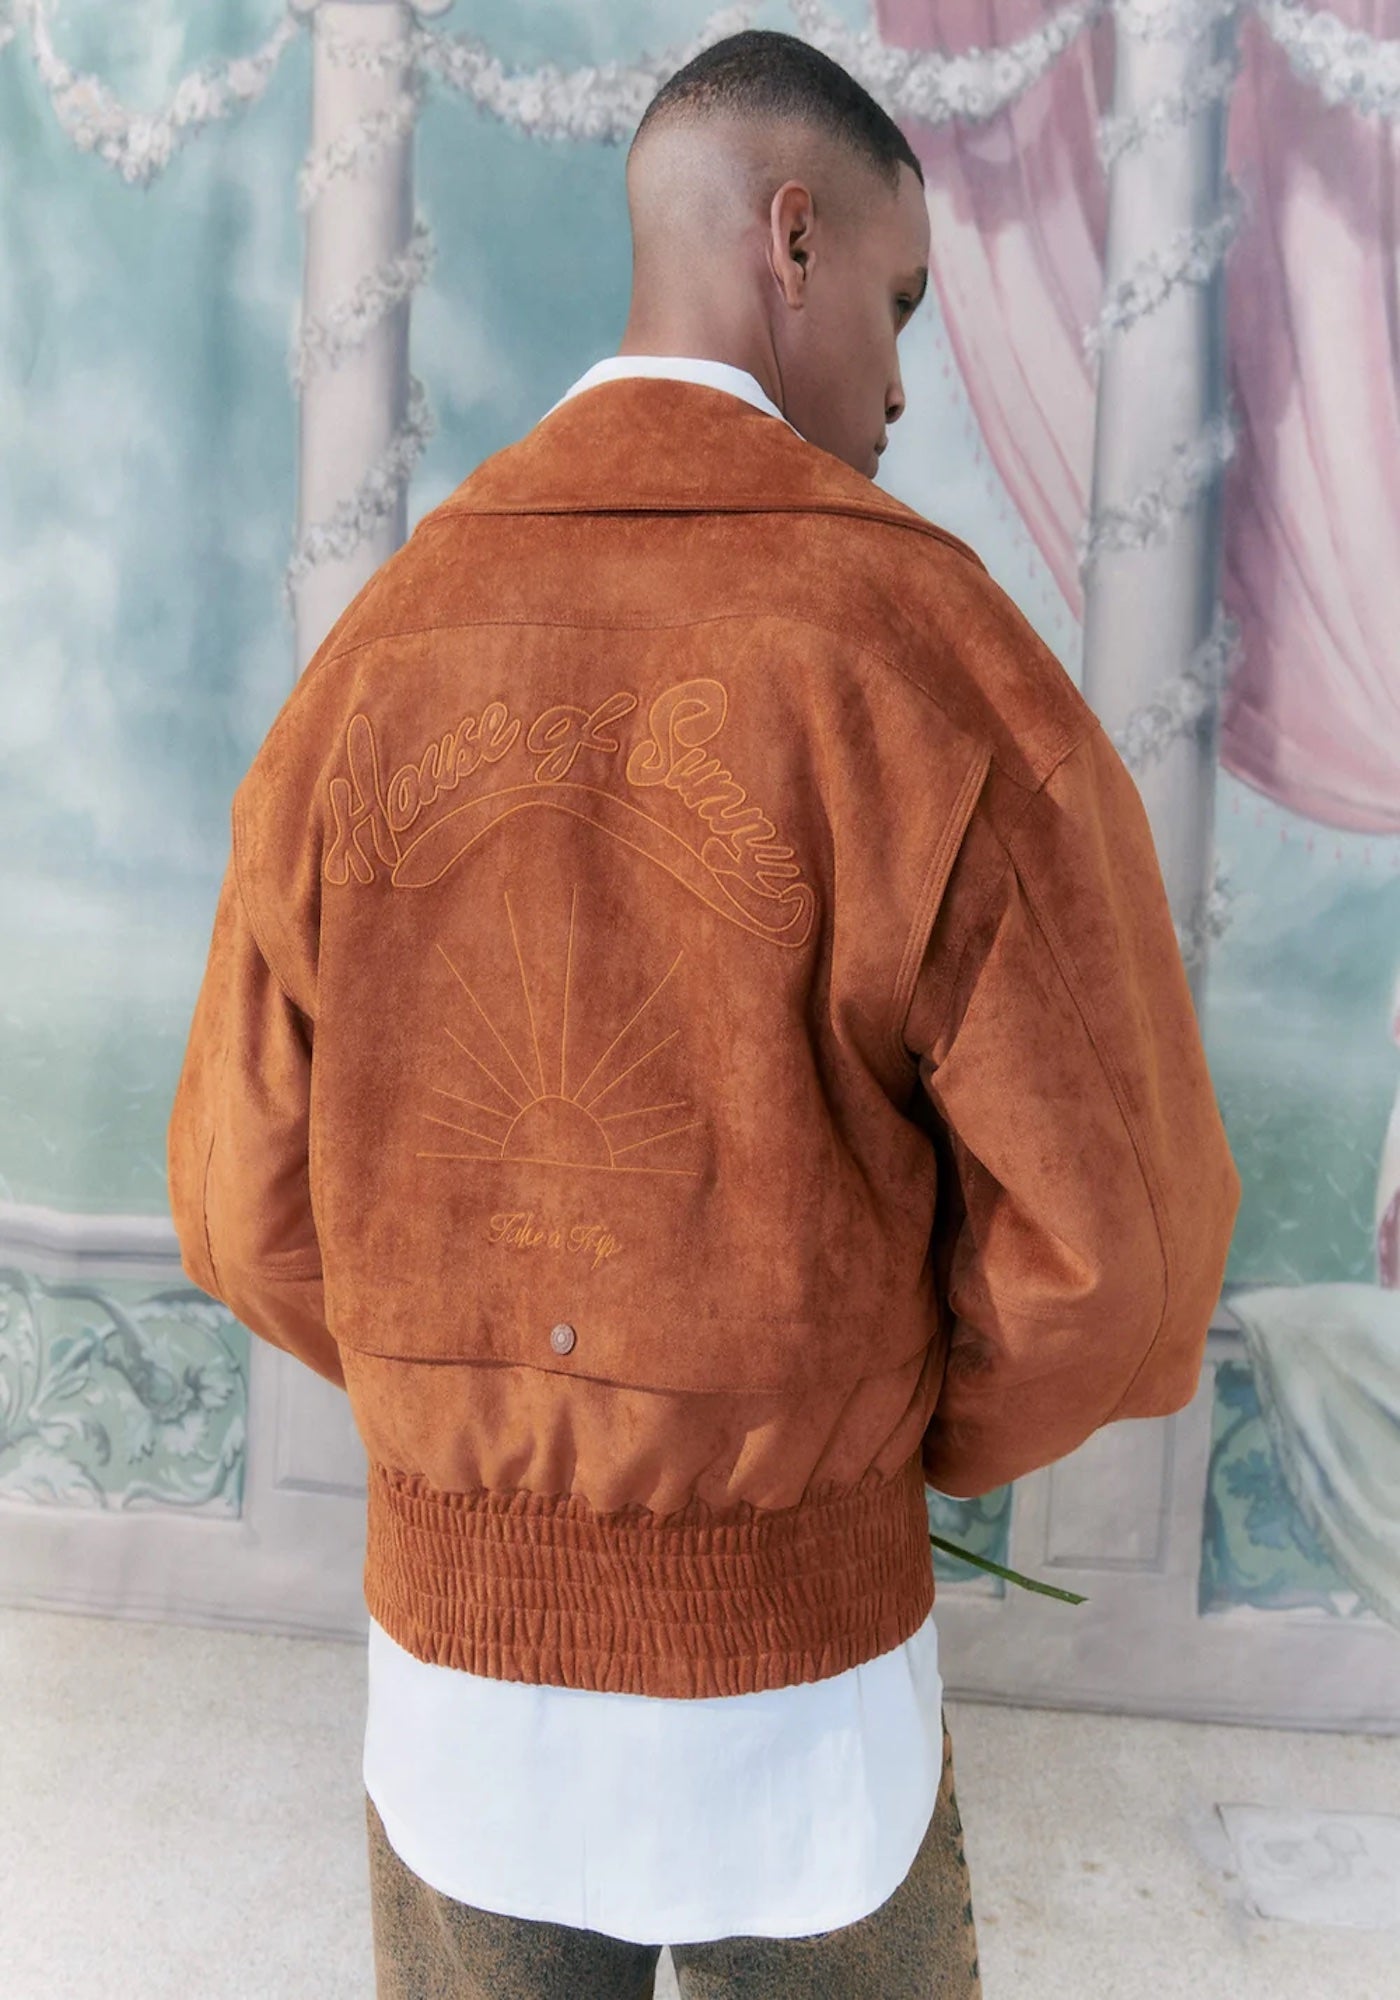 THE HYBRID JACKET IN TOBACCO